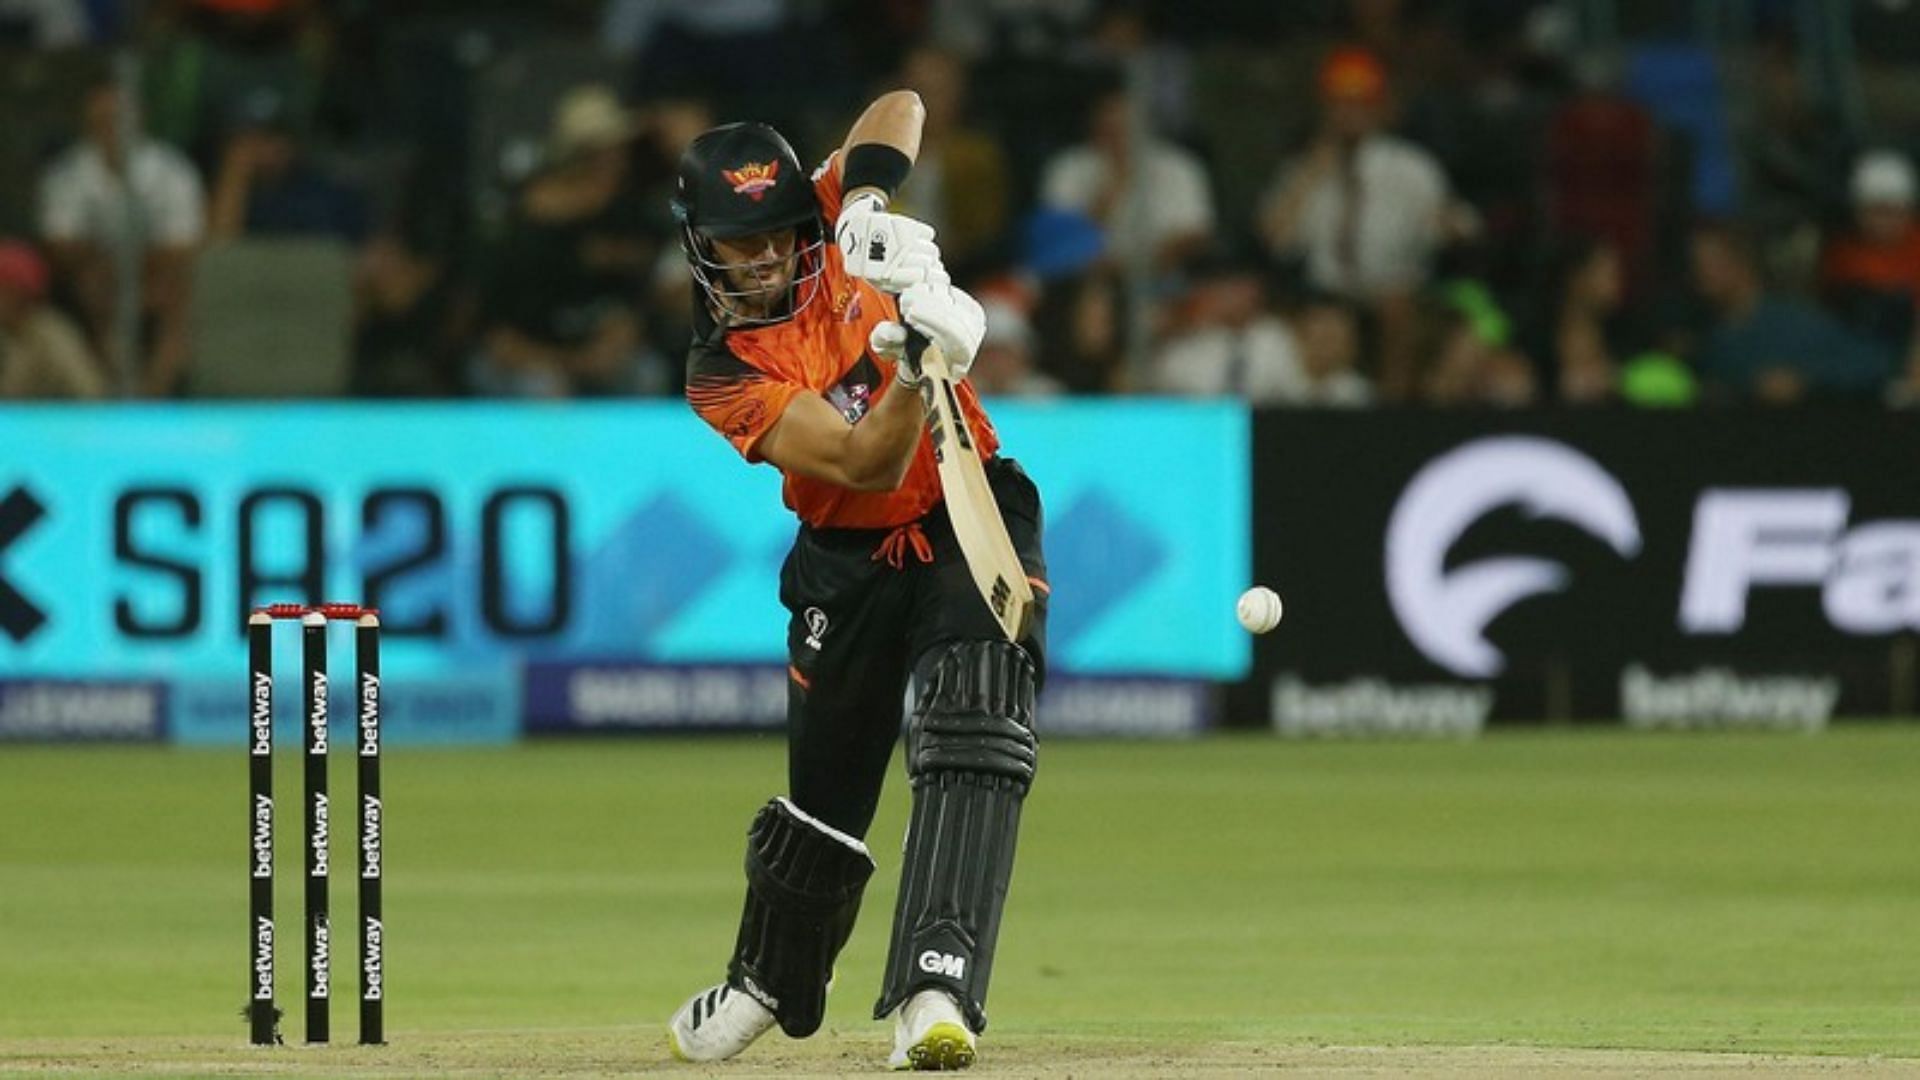 Aiden Markram in action for Sunrisers Eastern Cape (Credits: Sportzpics/SA20)